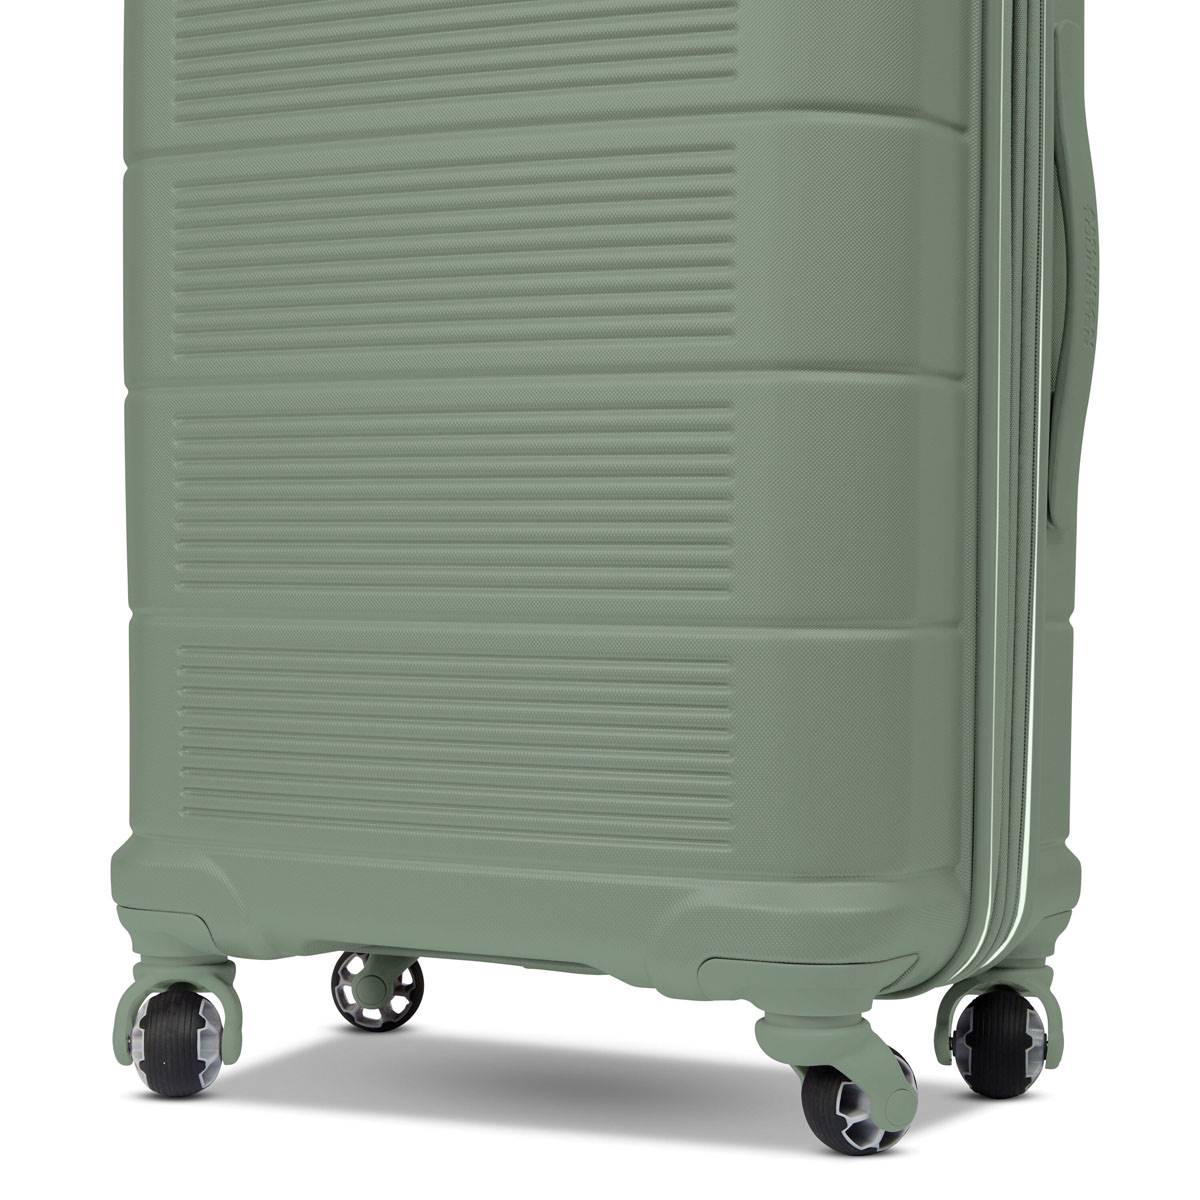 American Tourister Stratum 2.0 20in. Carry-On Luggage